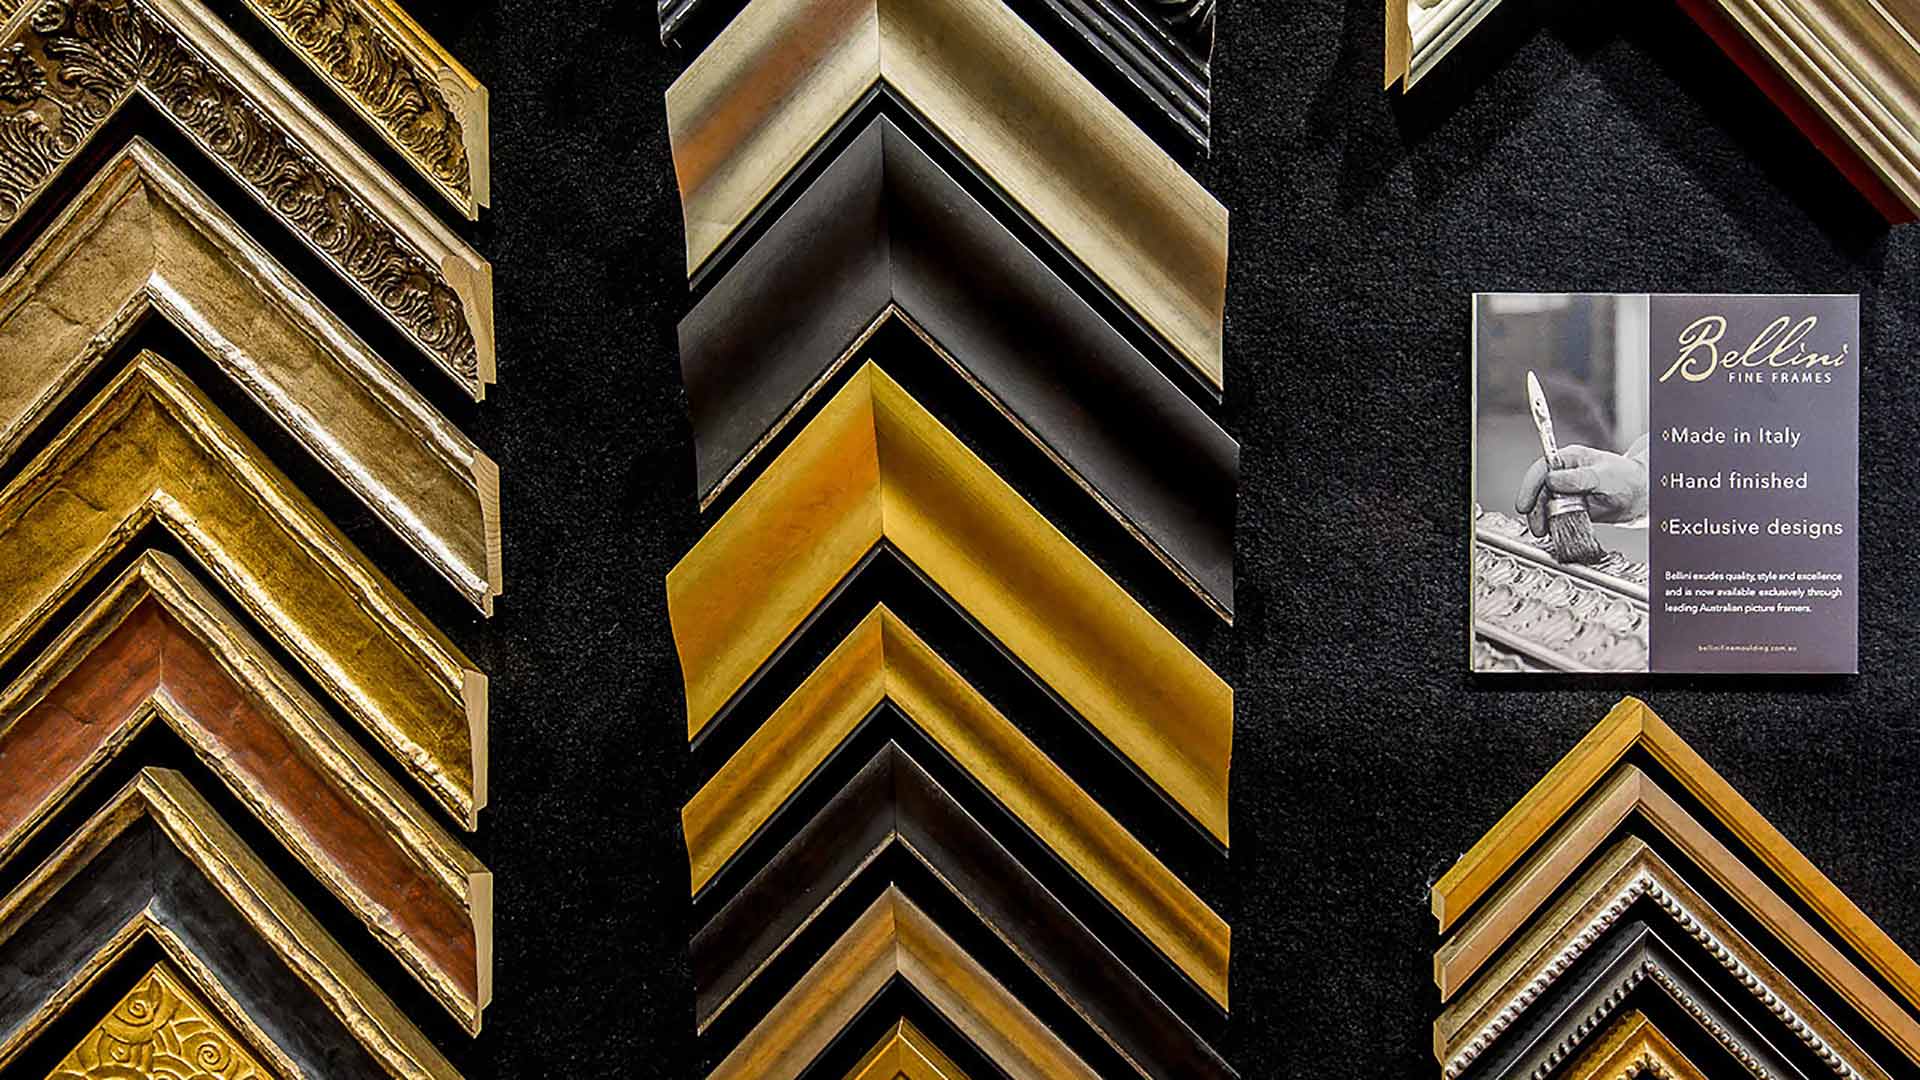 What does custom picture framing achieve?